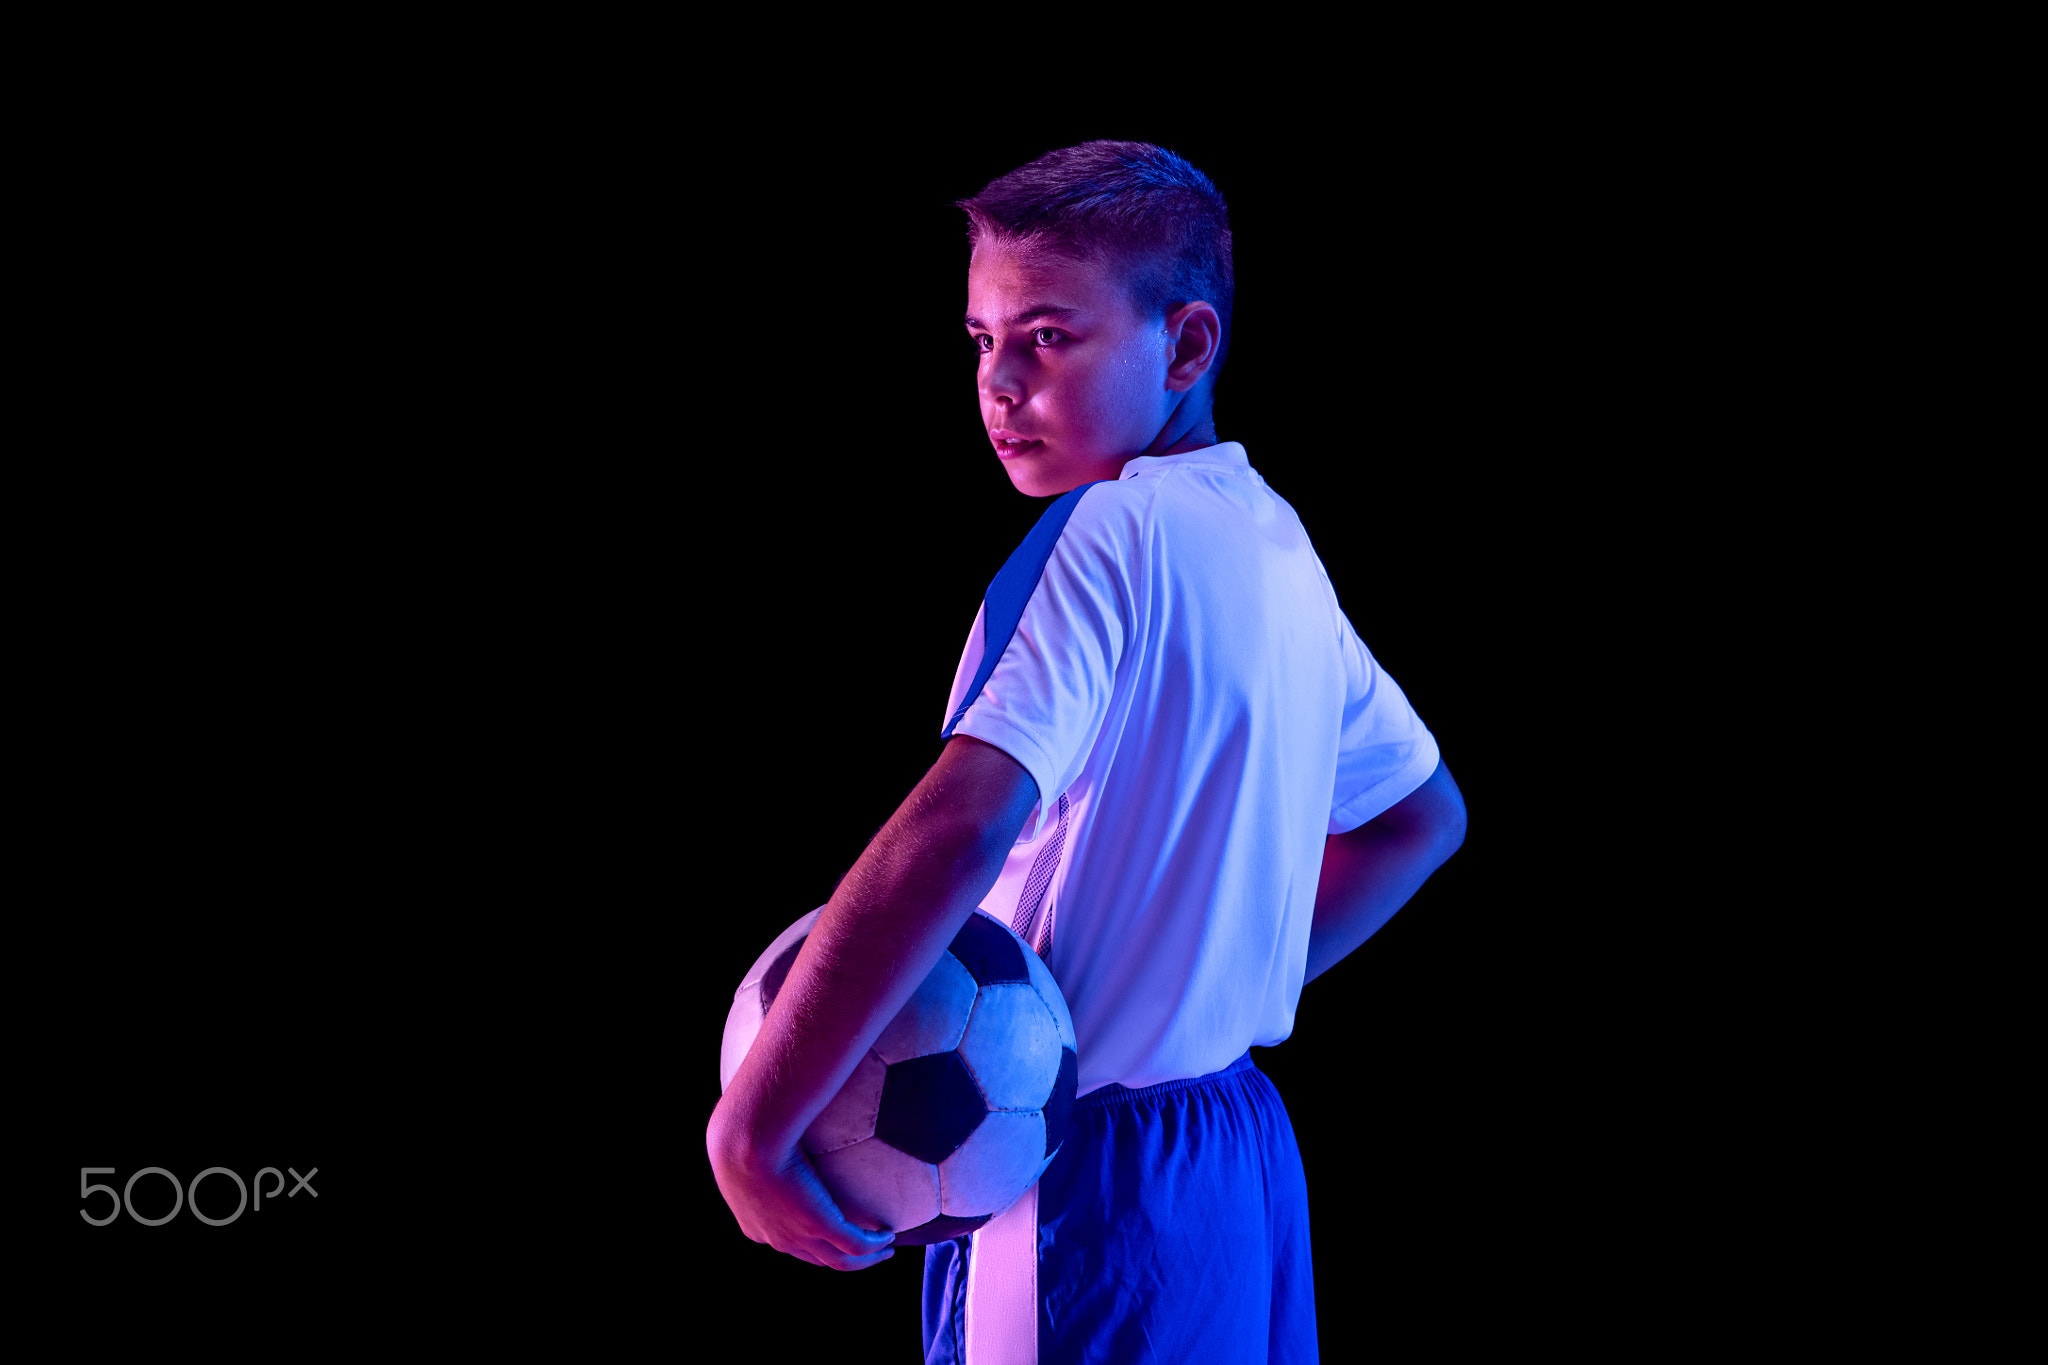 Young boy as a soccer or football player on dark studio background